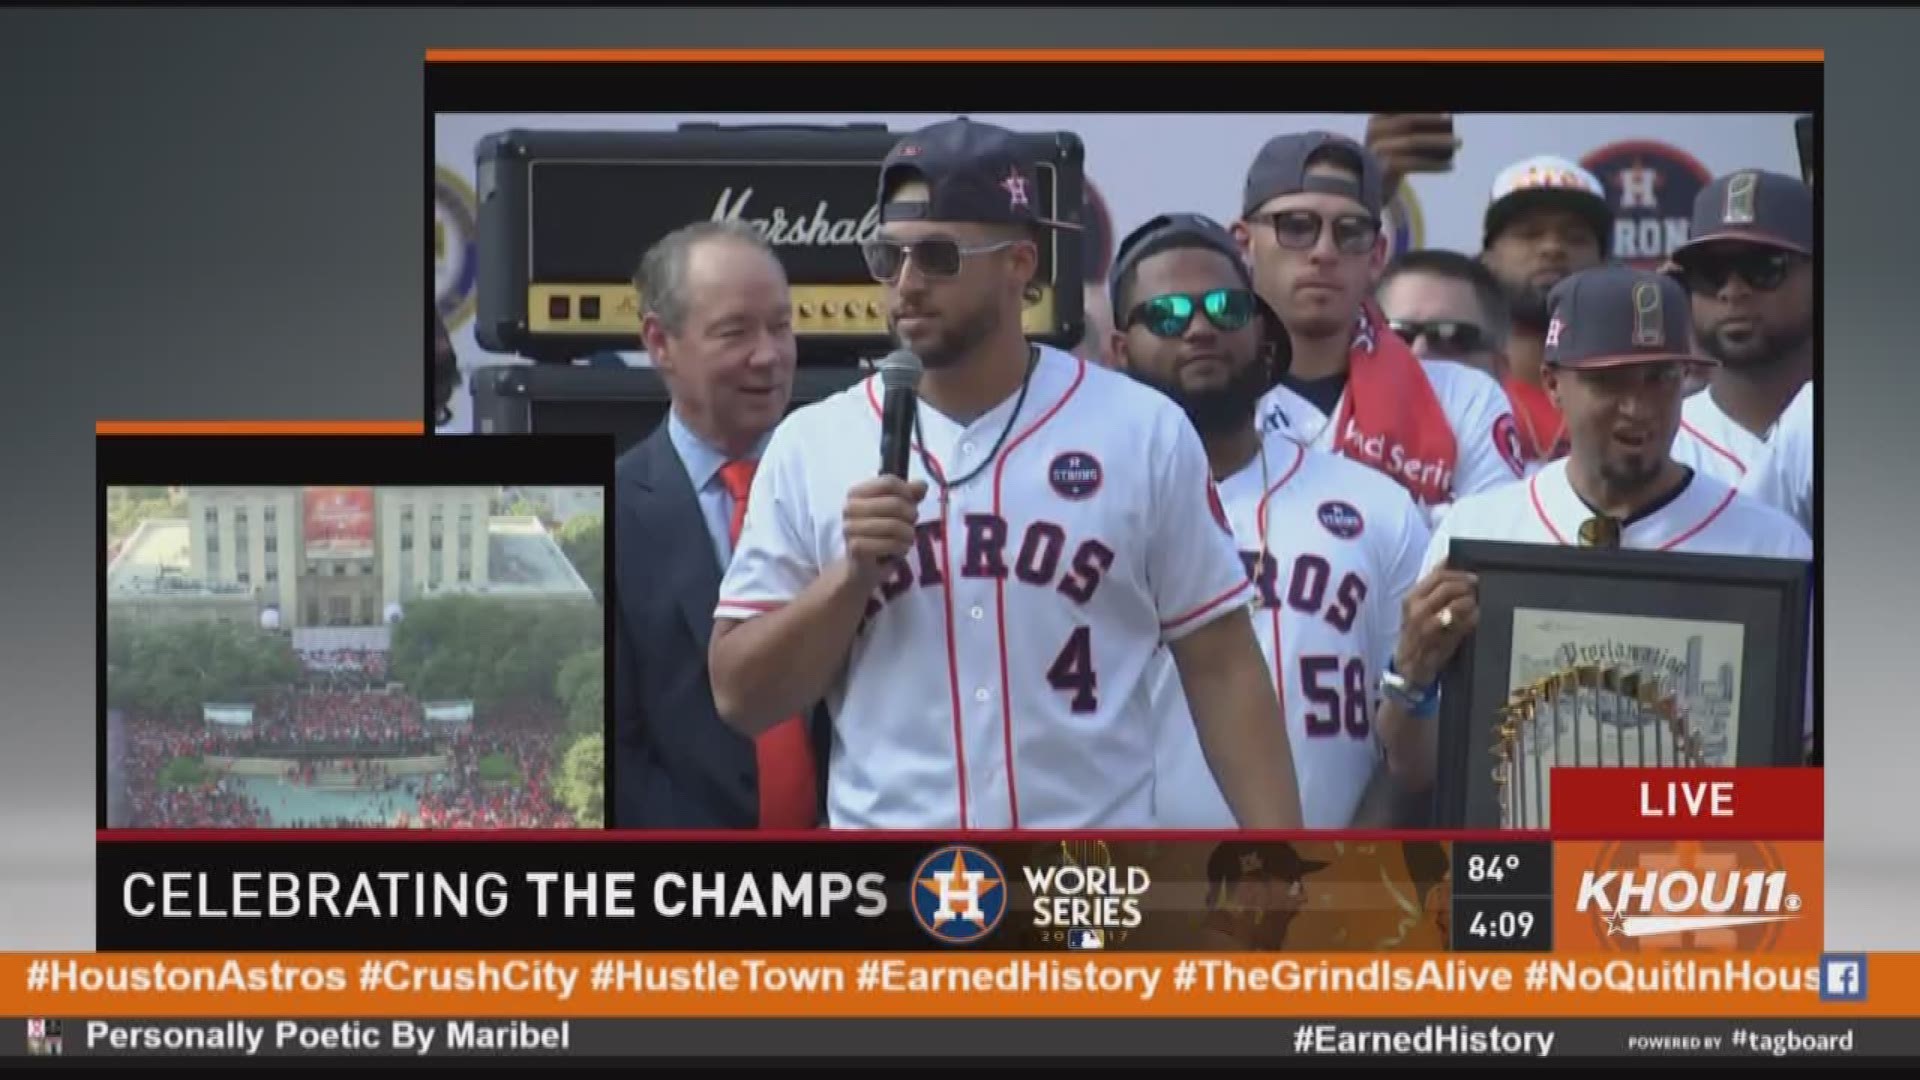 Houston Astros World Series MVP George Springer thanked the fans for sticking with the team and believing in them when so many others didn't.